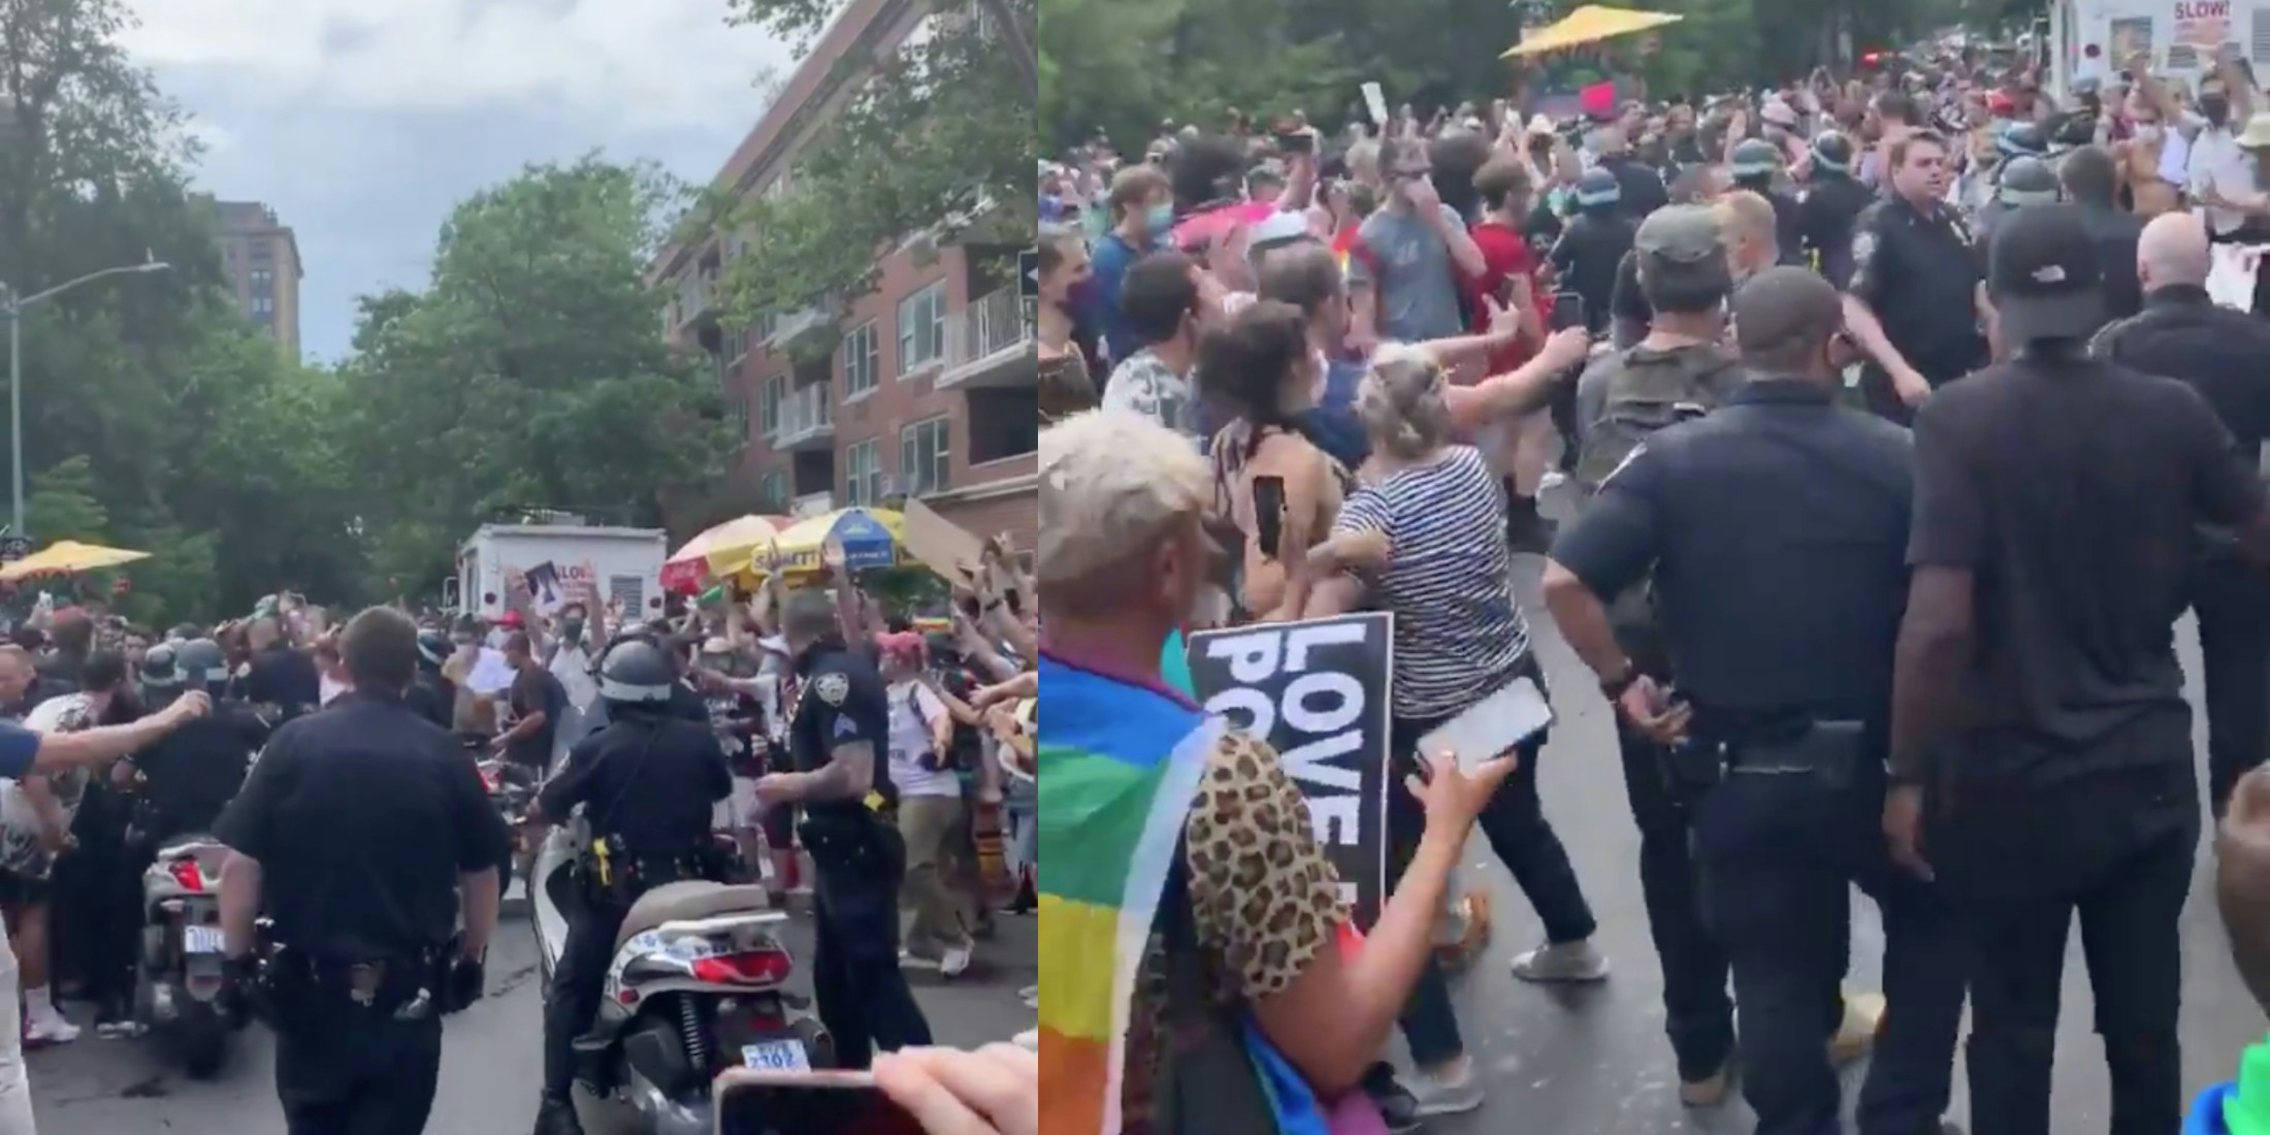 Screenshots show cops at the NYC Queer March